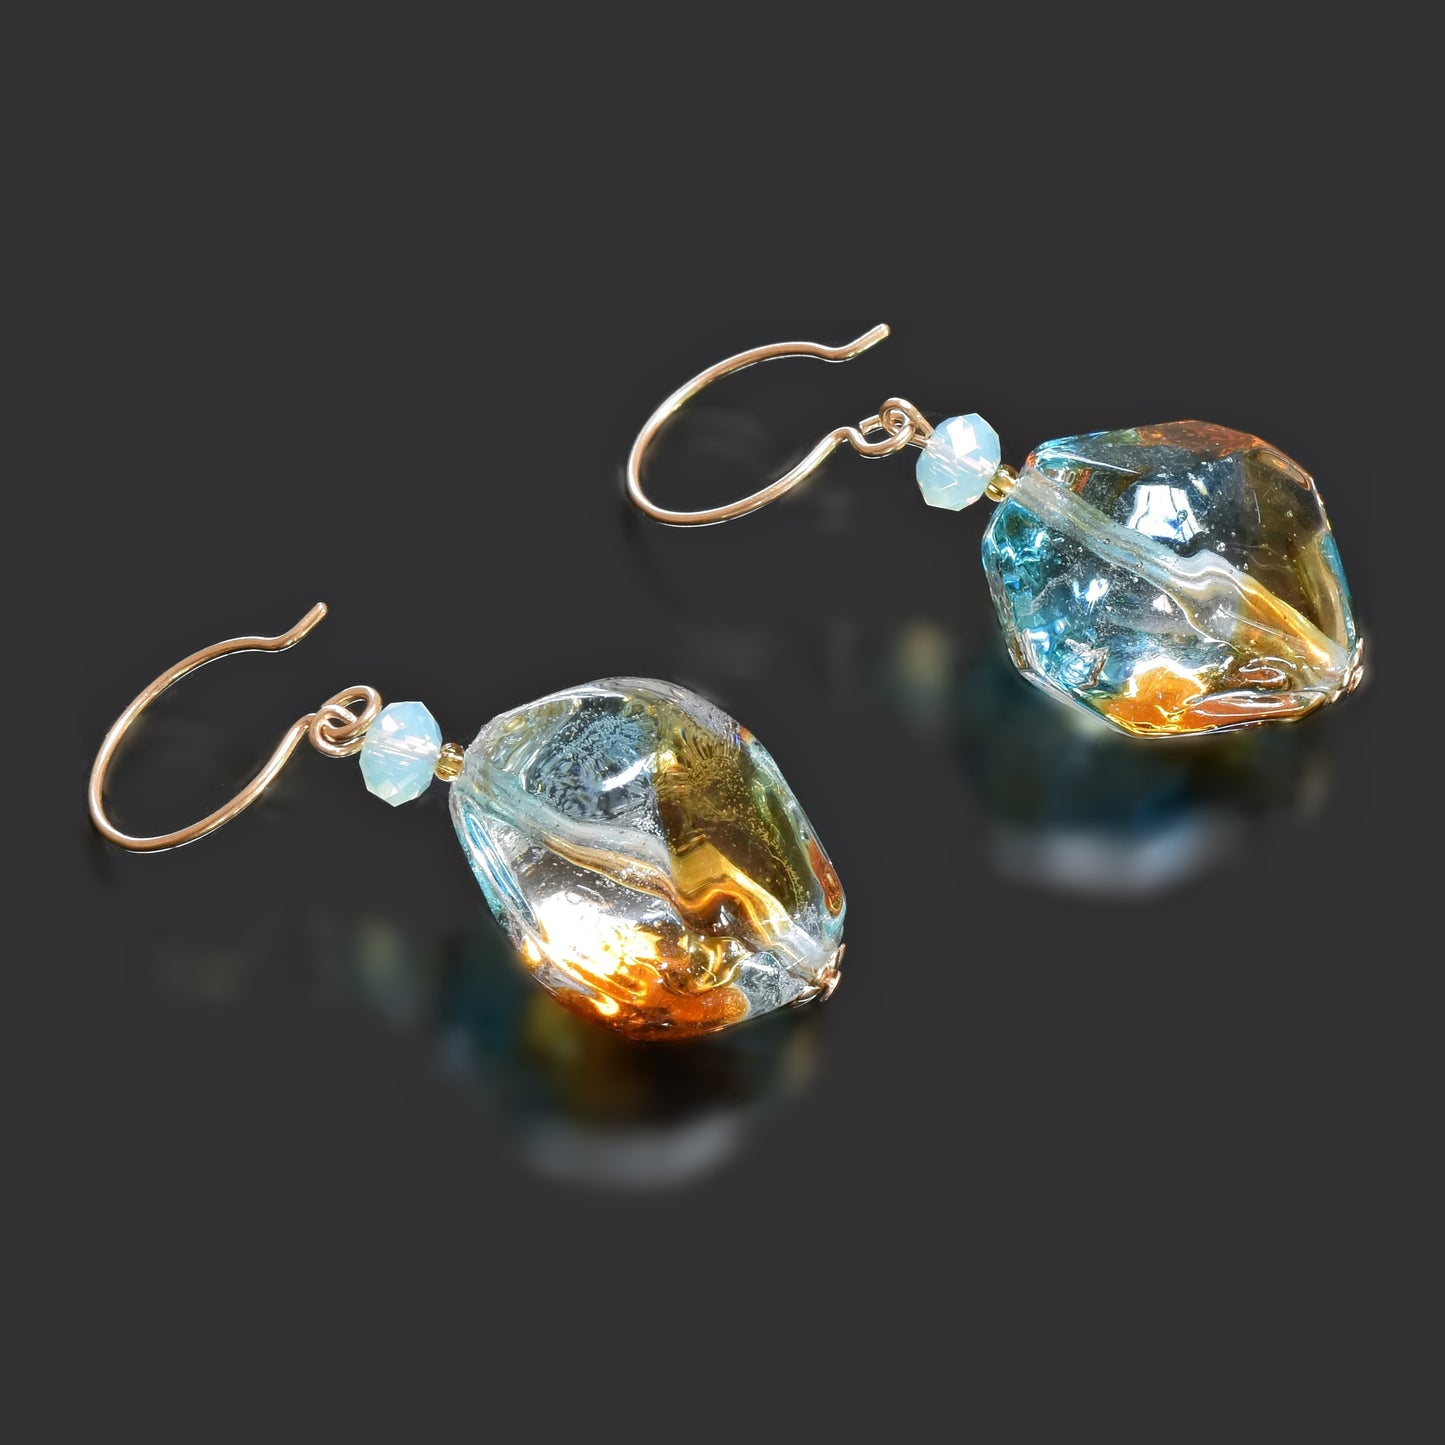 Multi-Color Italian Murano Glass Nugget Earrings with Gold-Filled Ear-Wires Gold Filled 